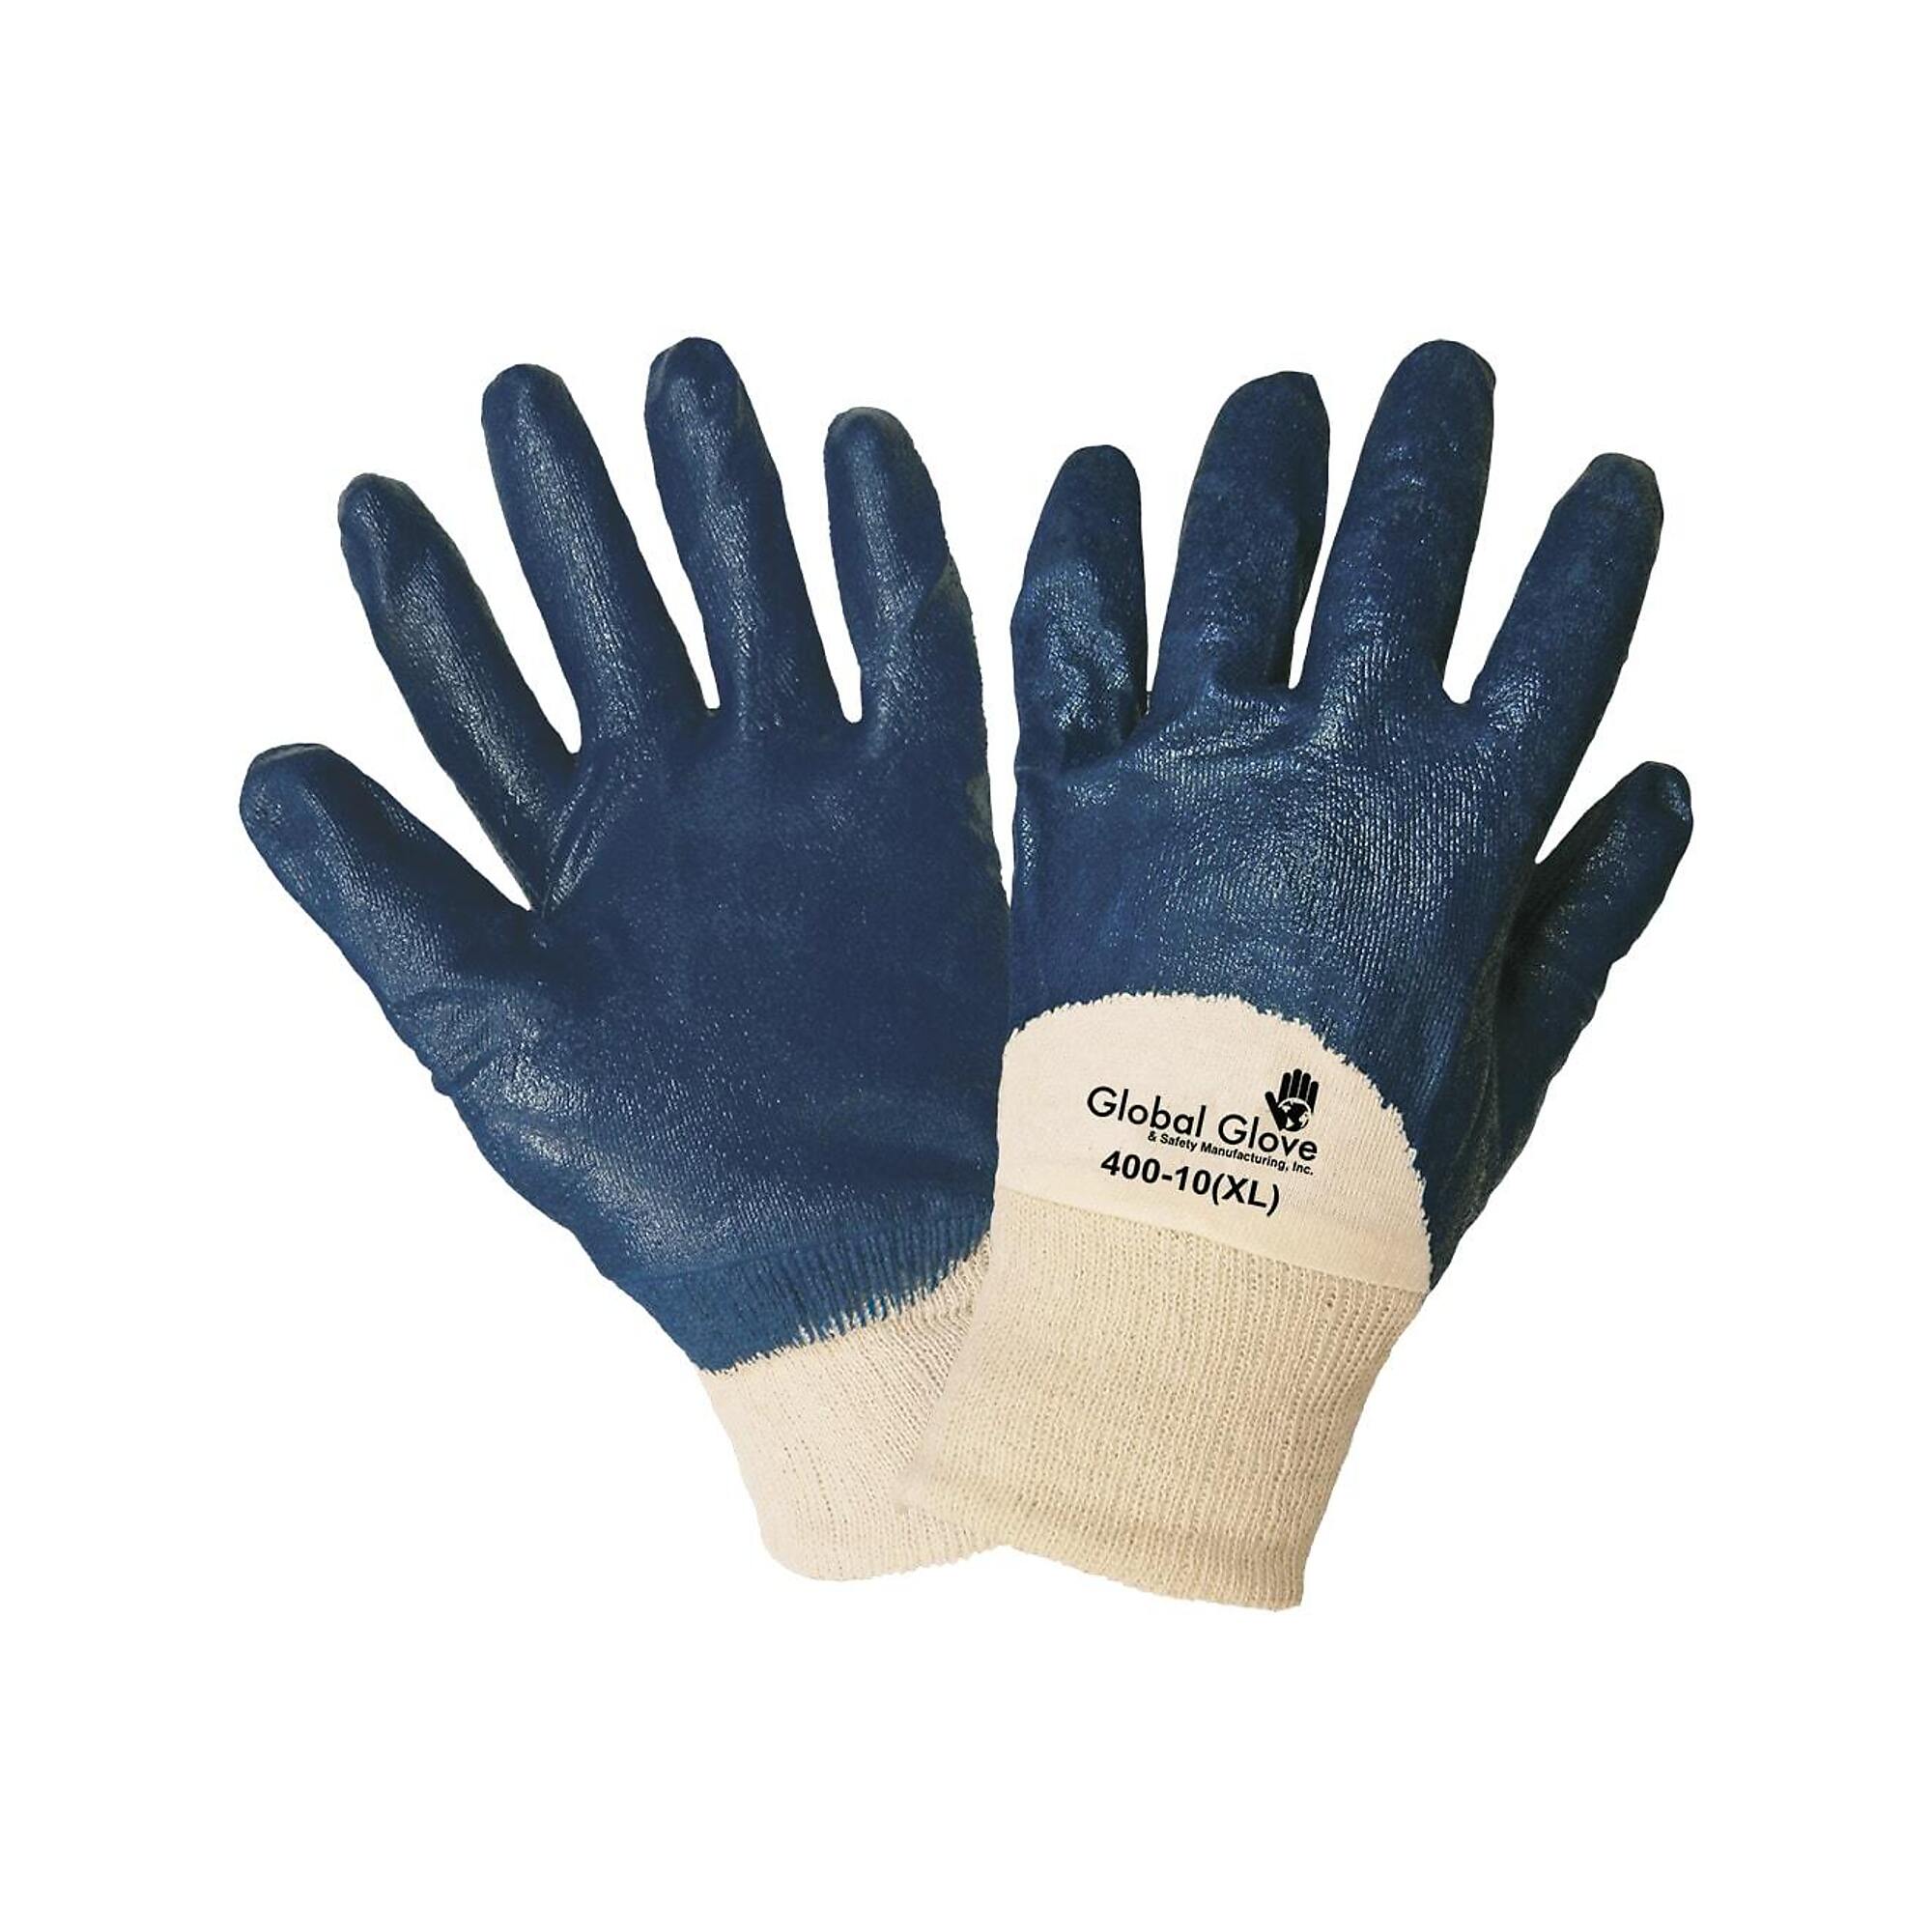 Global Glove, 2-Pc Interlock Shell, Blue 3/4 Coat Nitrile Gloves- 12 Pairs, Size L, Color Tan/Blue, Included (qty.) 12 Model 400-9(L)